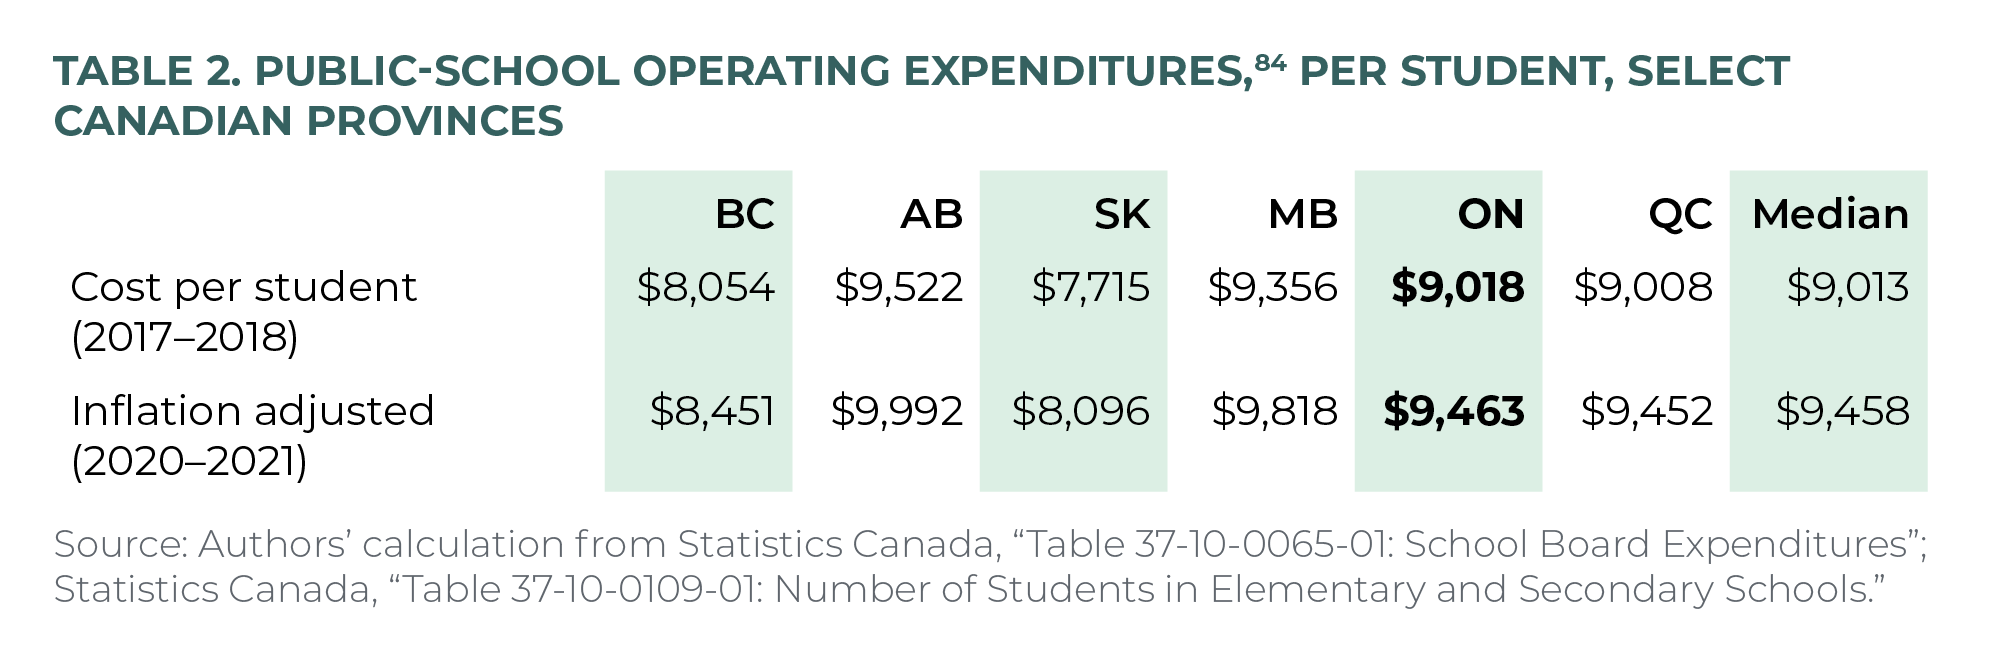 Table 2. Public-school operating expenditures, per student, select Canadian provinces